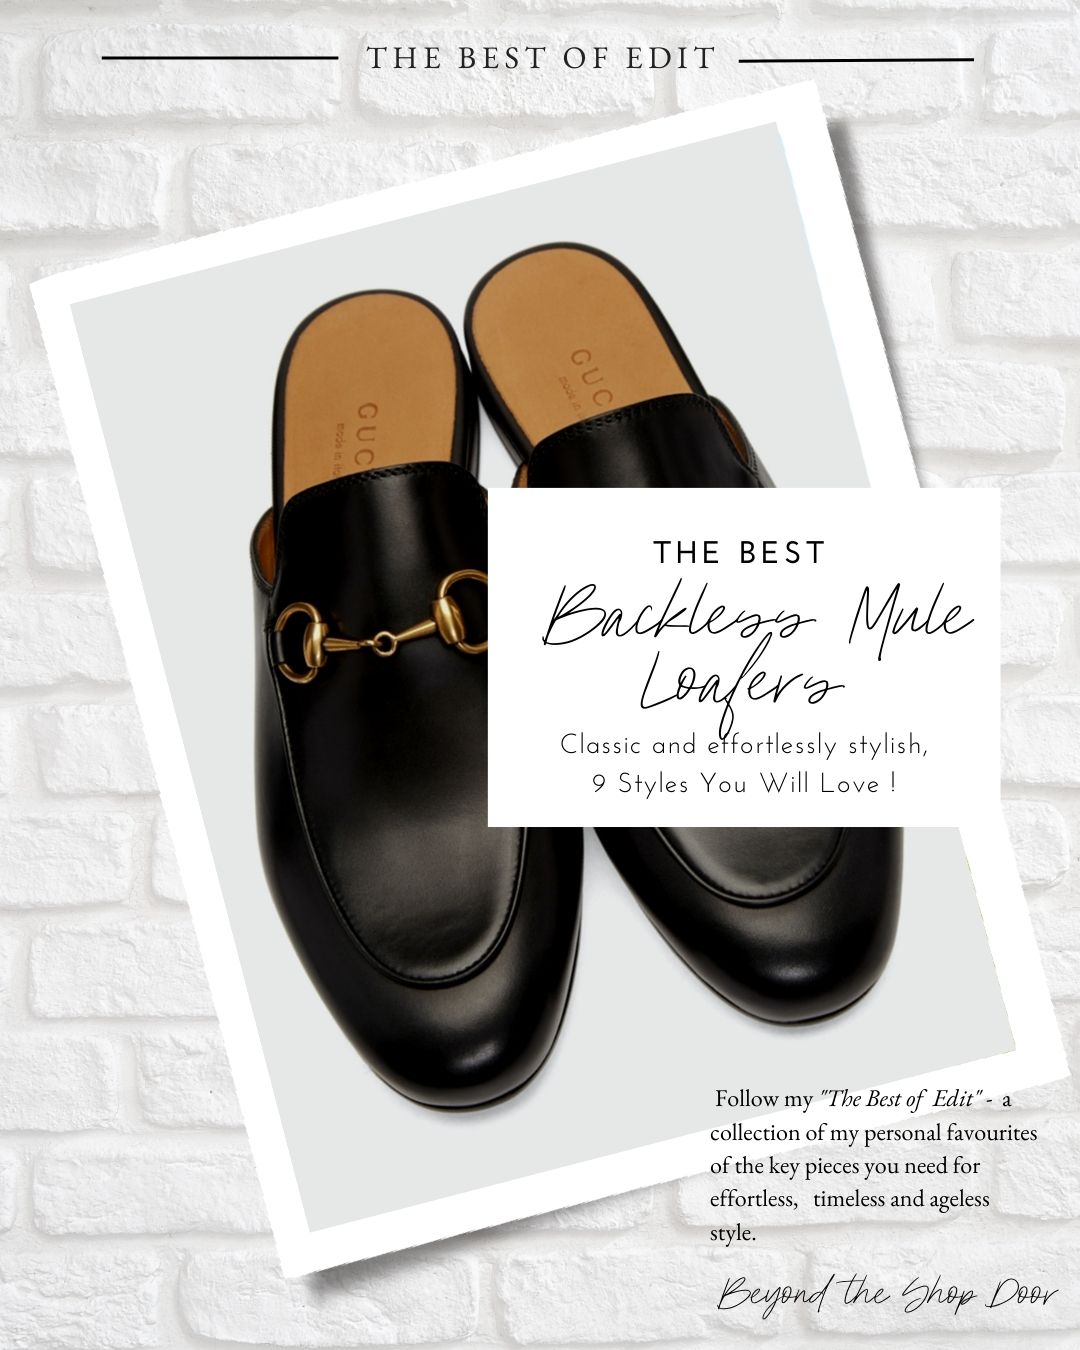 The Best Backless Mule Loafers - 9 Styles You Will Love! - Beyond